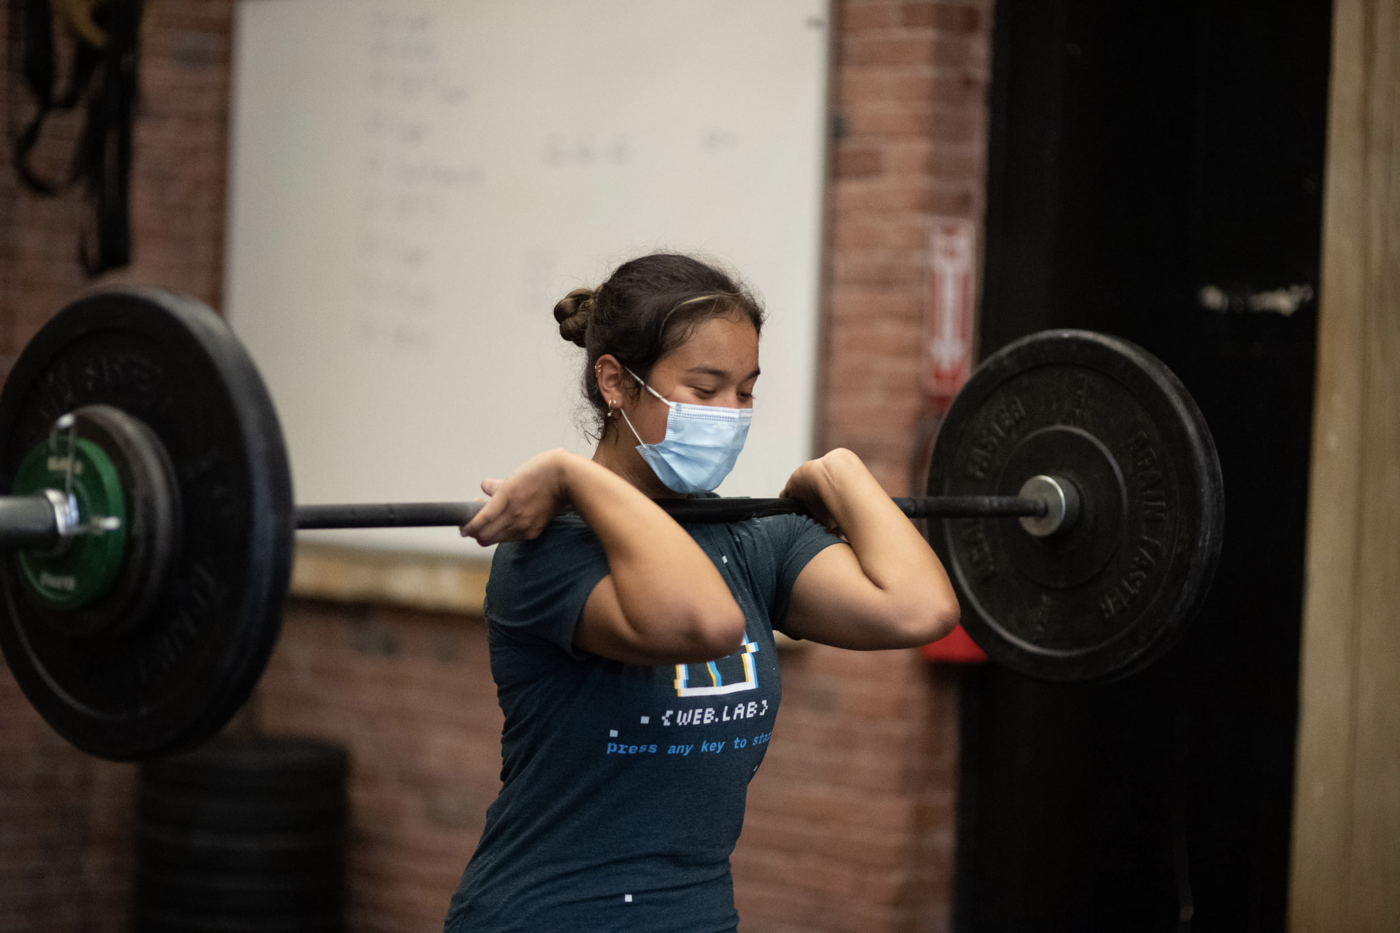 person lifting barbell